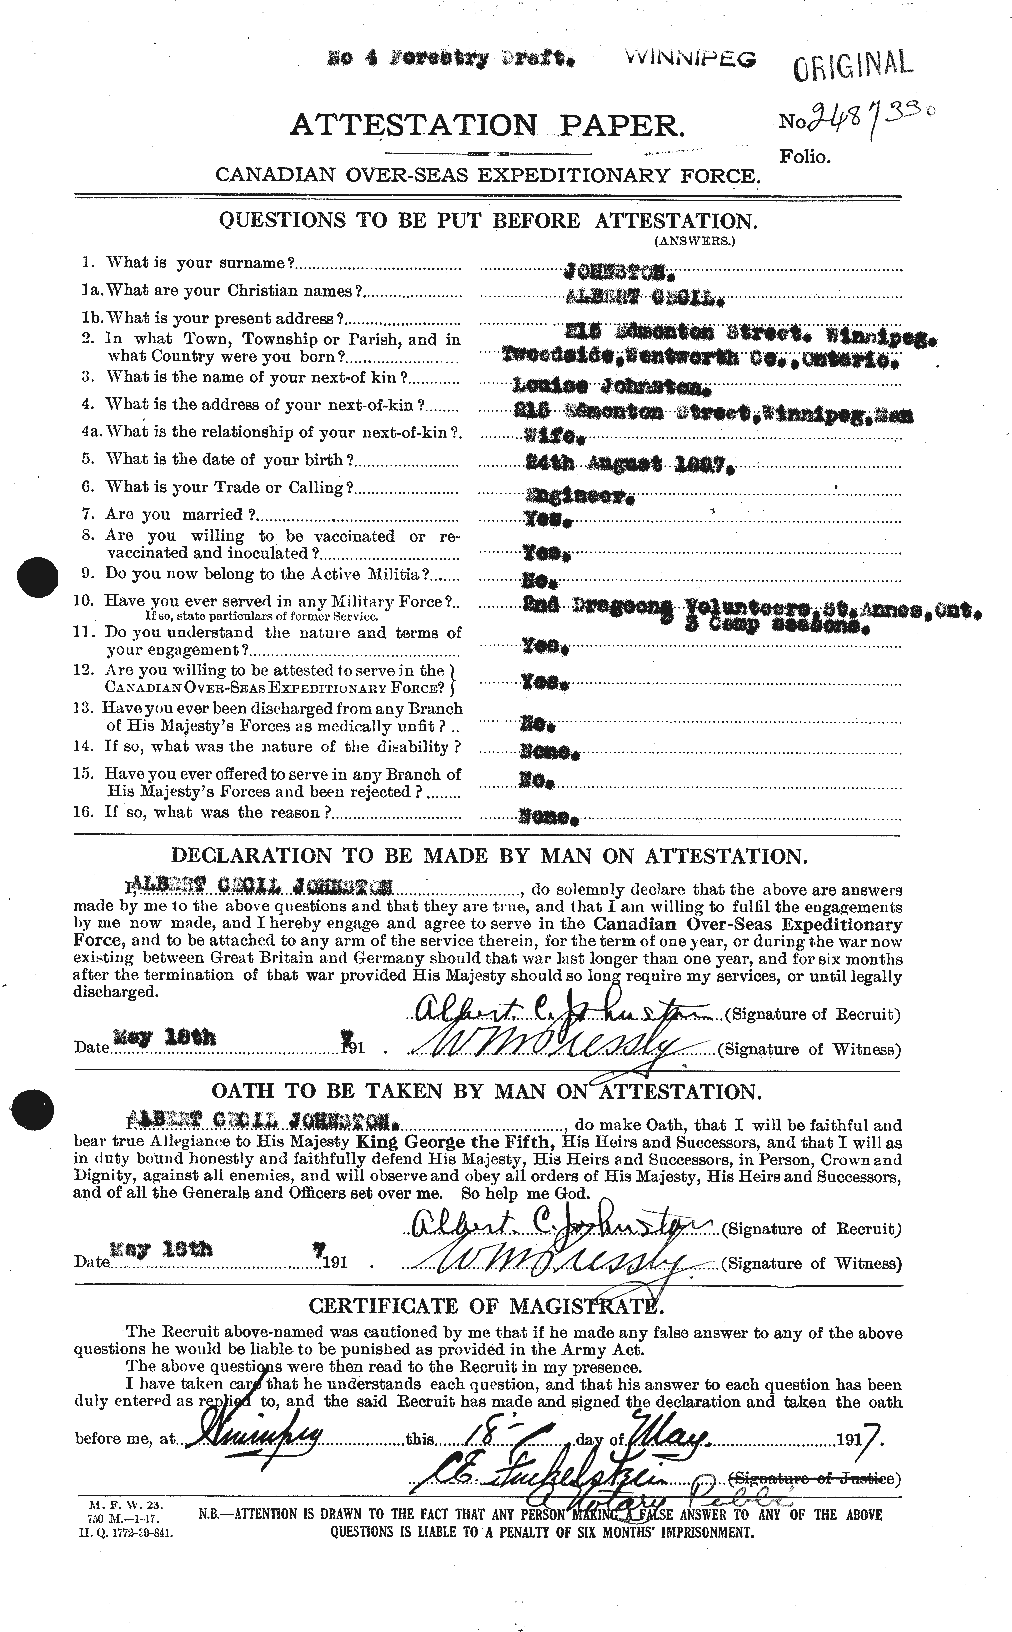 Personnel Records of the First World War - CEF 420935a